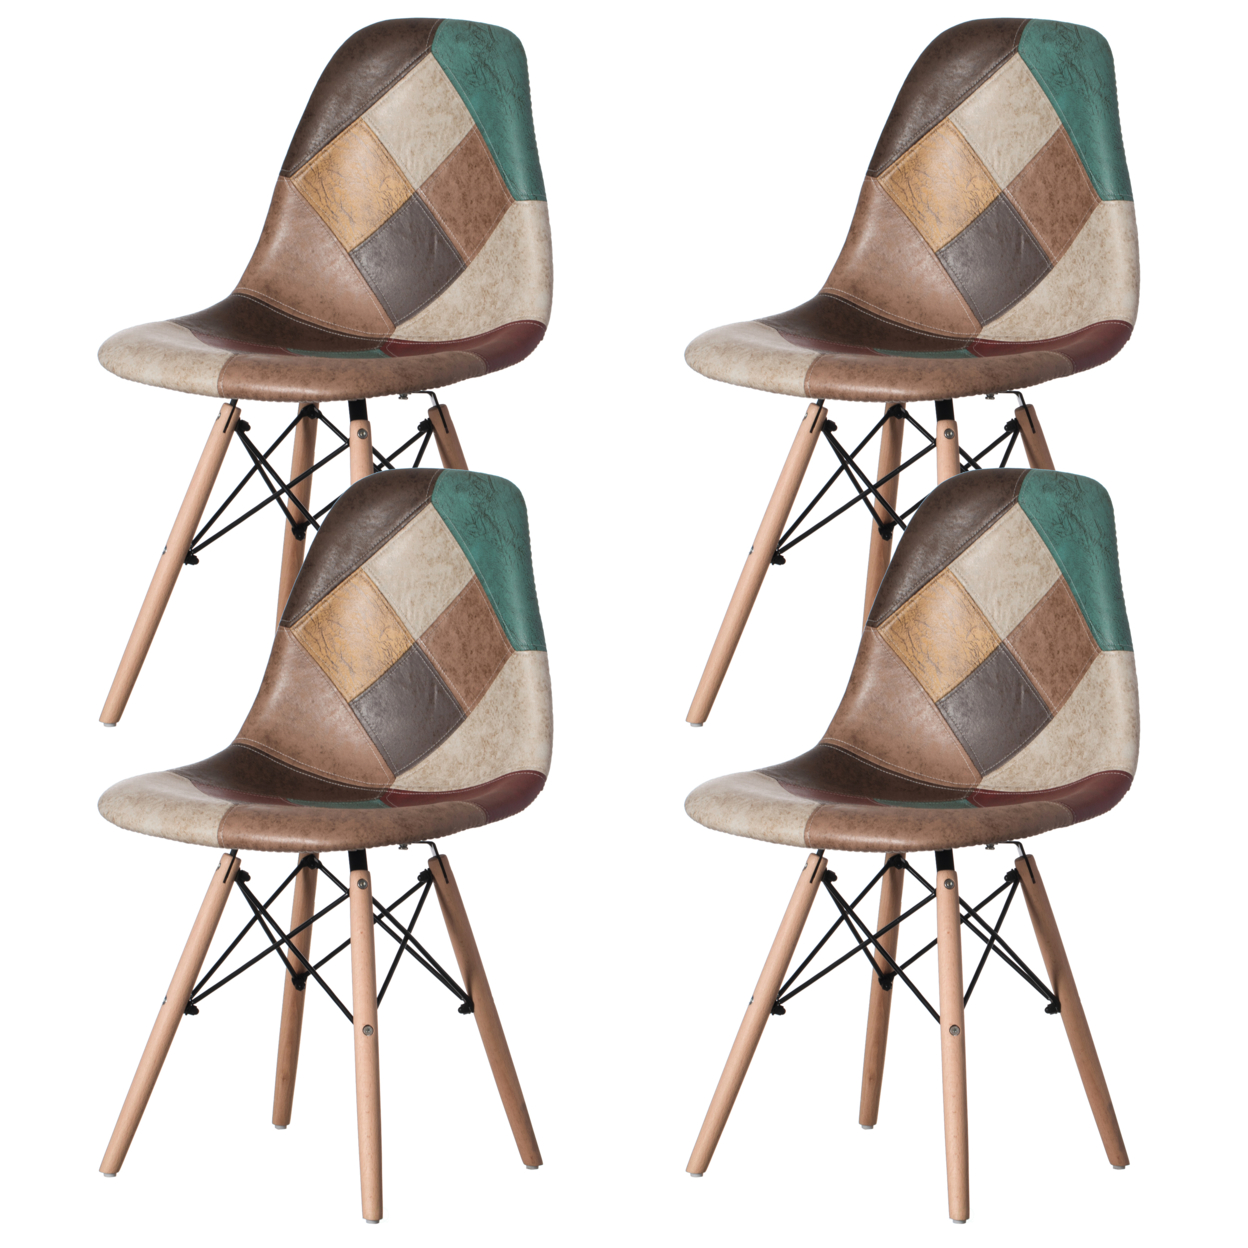 Modern Fabric Patchwork Chair With Leather And Suede Like Tones With Wooden Legs For Kitchen, Dining Room, Entryway, Living Room - Set Of 4